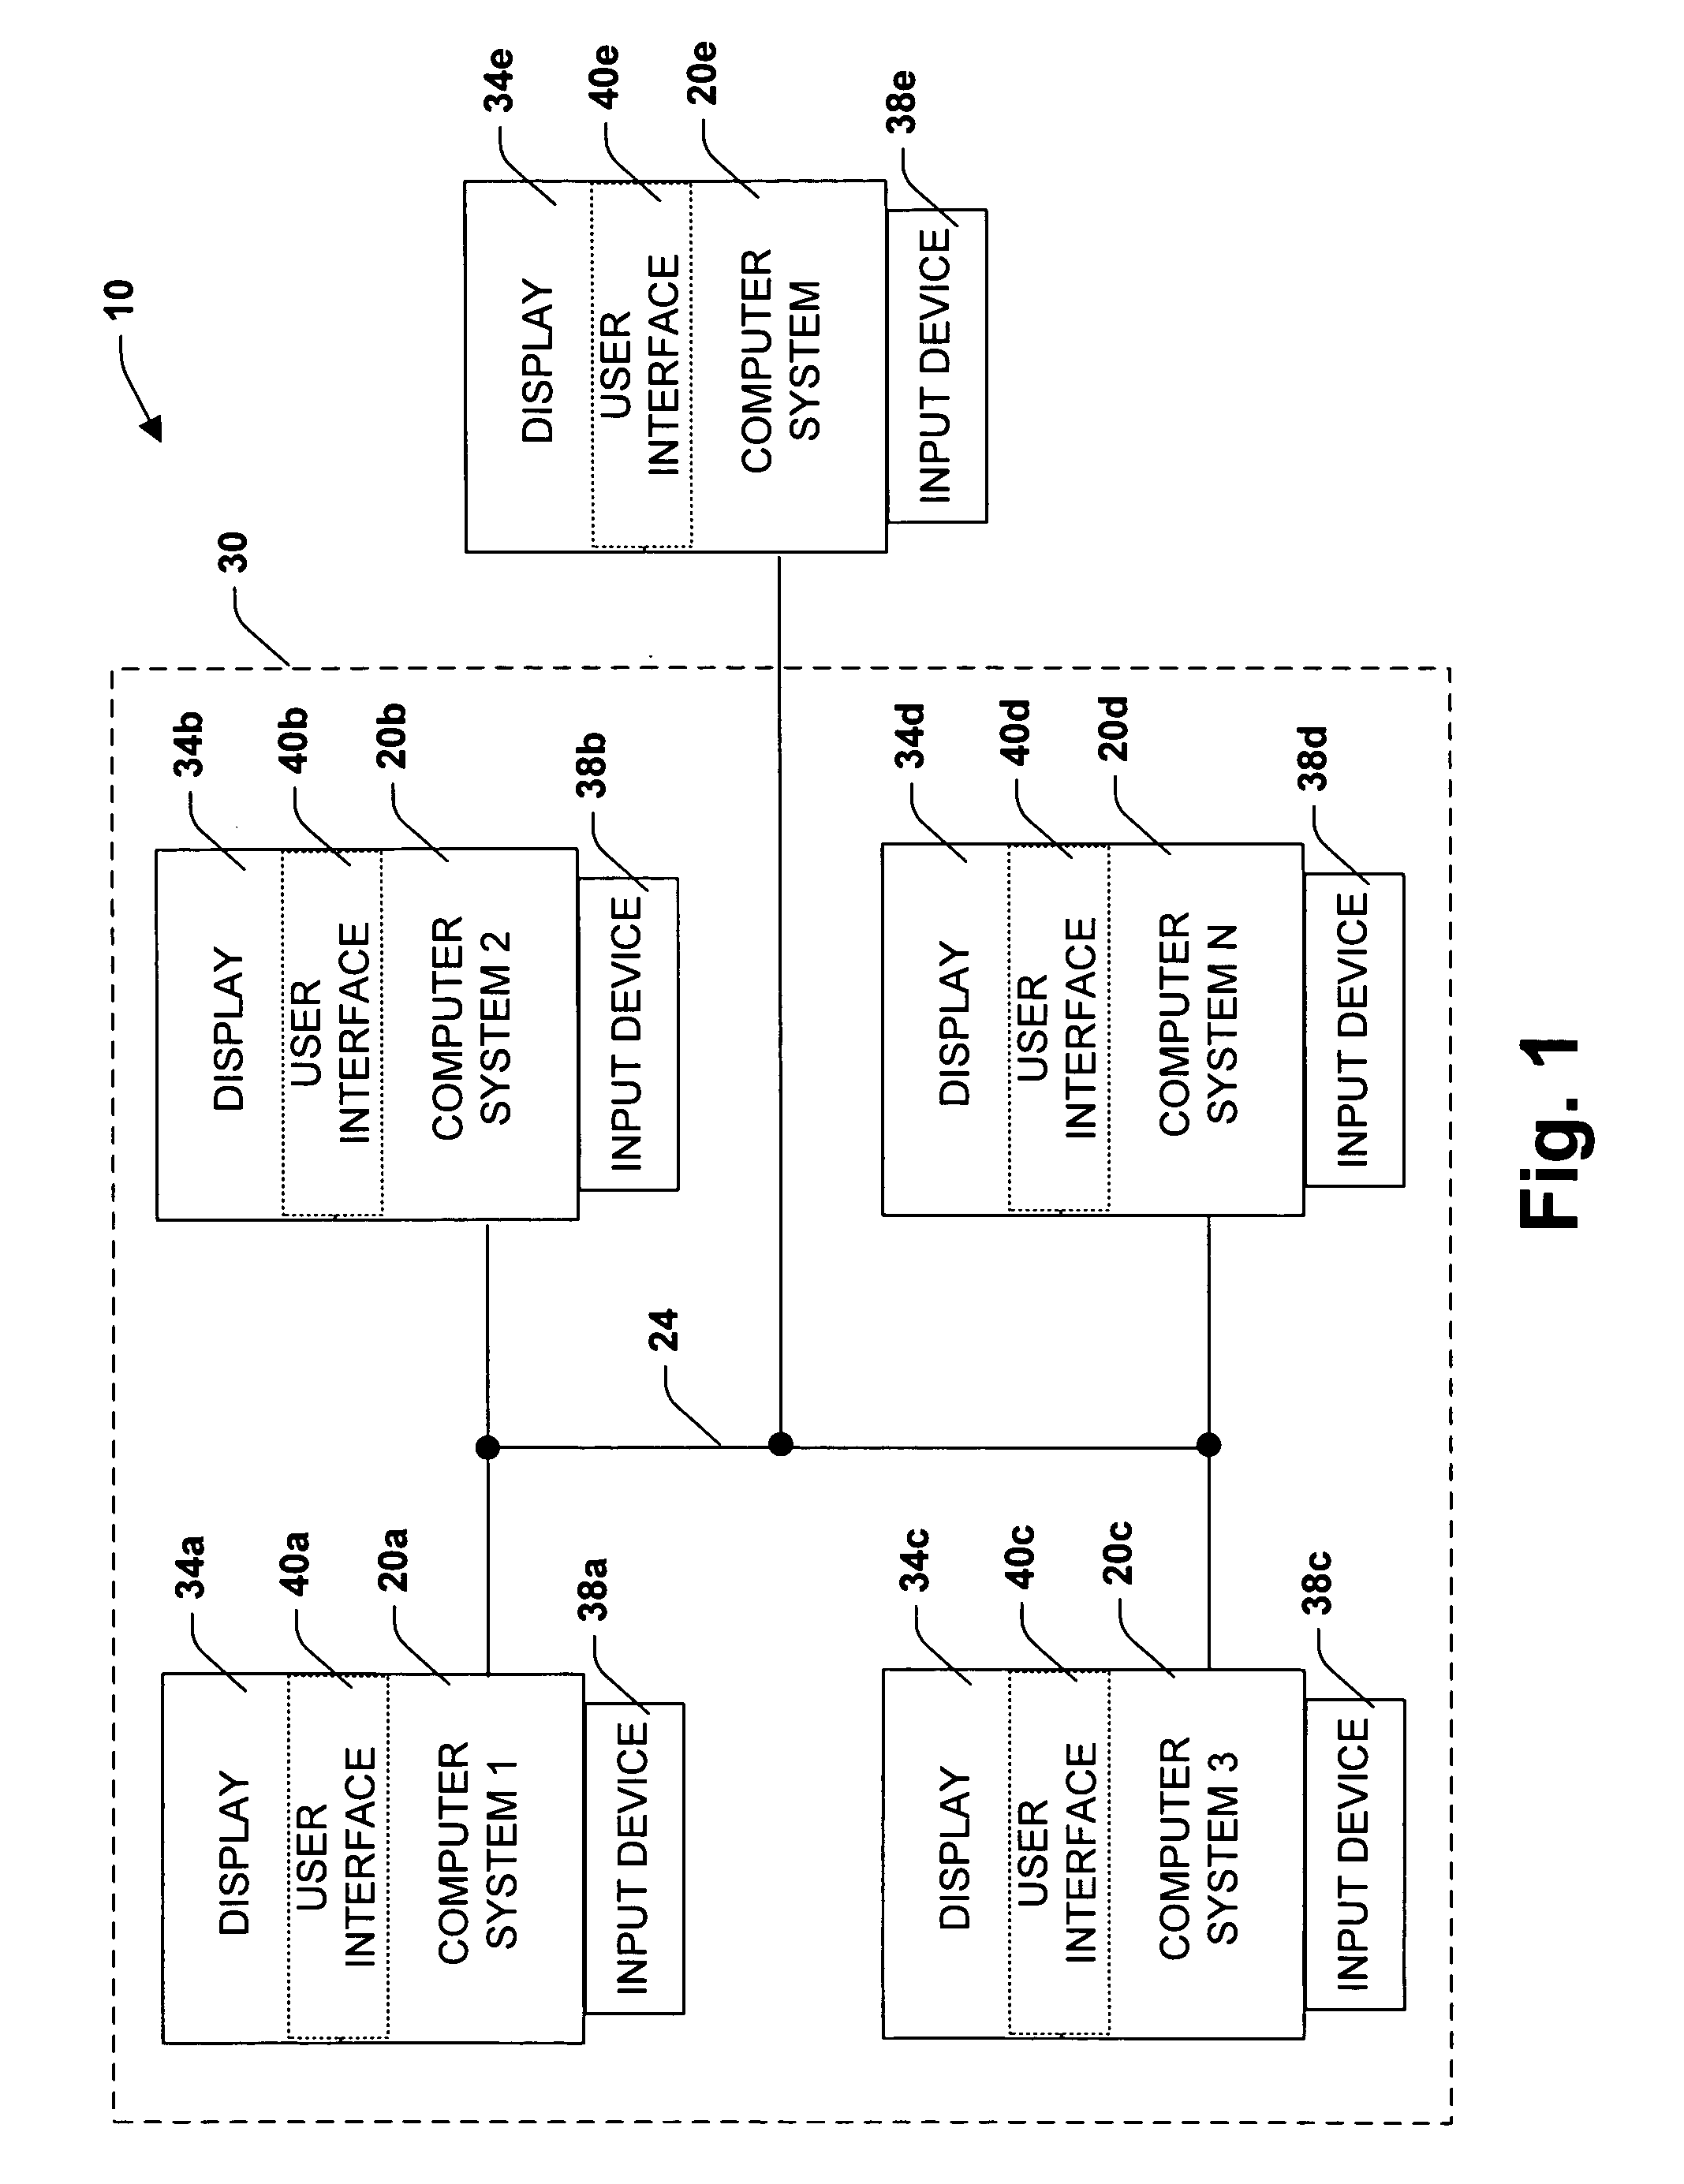 User interface to display and manage an entity and associated resources